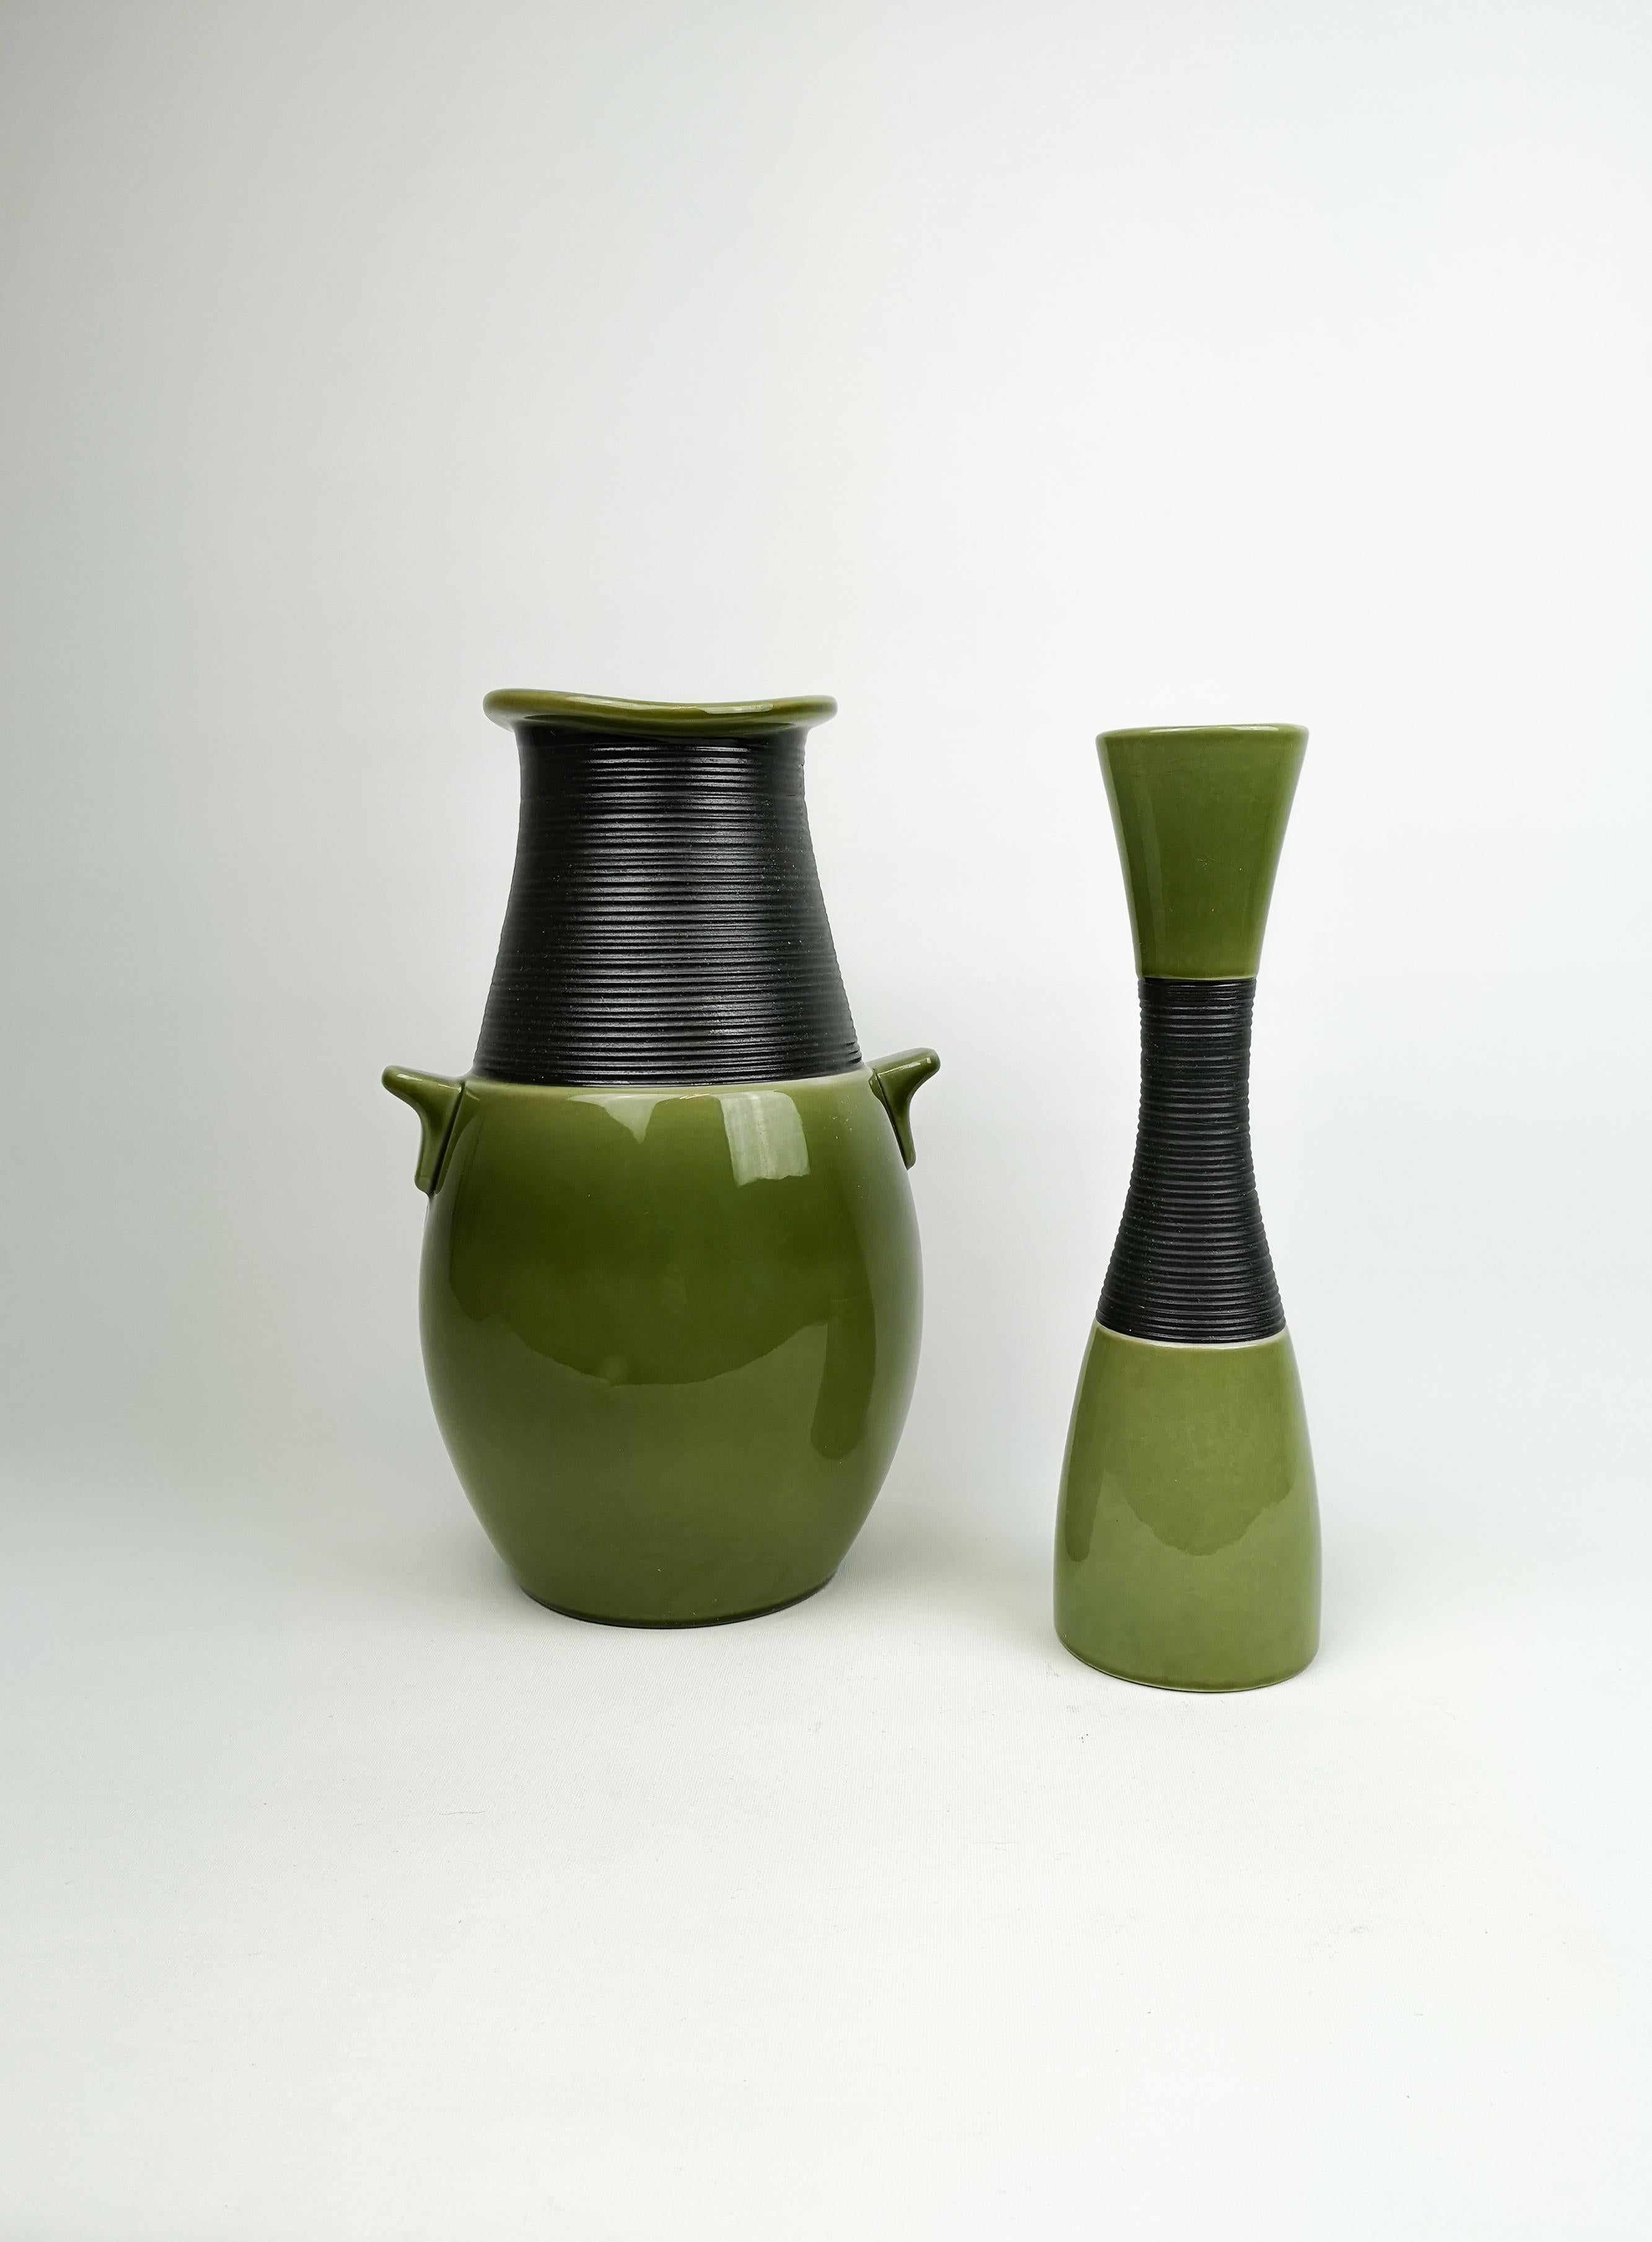 The vases were made in 1950s for Rörstrand Sweden and designed by Carl-Harry Stålhane. 

Both vases are in good condition. The small one with some age cracks on the bottom.

Measures: The Big one H 29 x 15 cm The smaller one 27 x 8 cm.
 